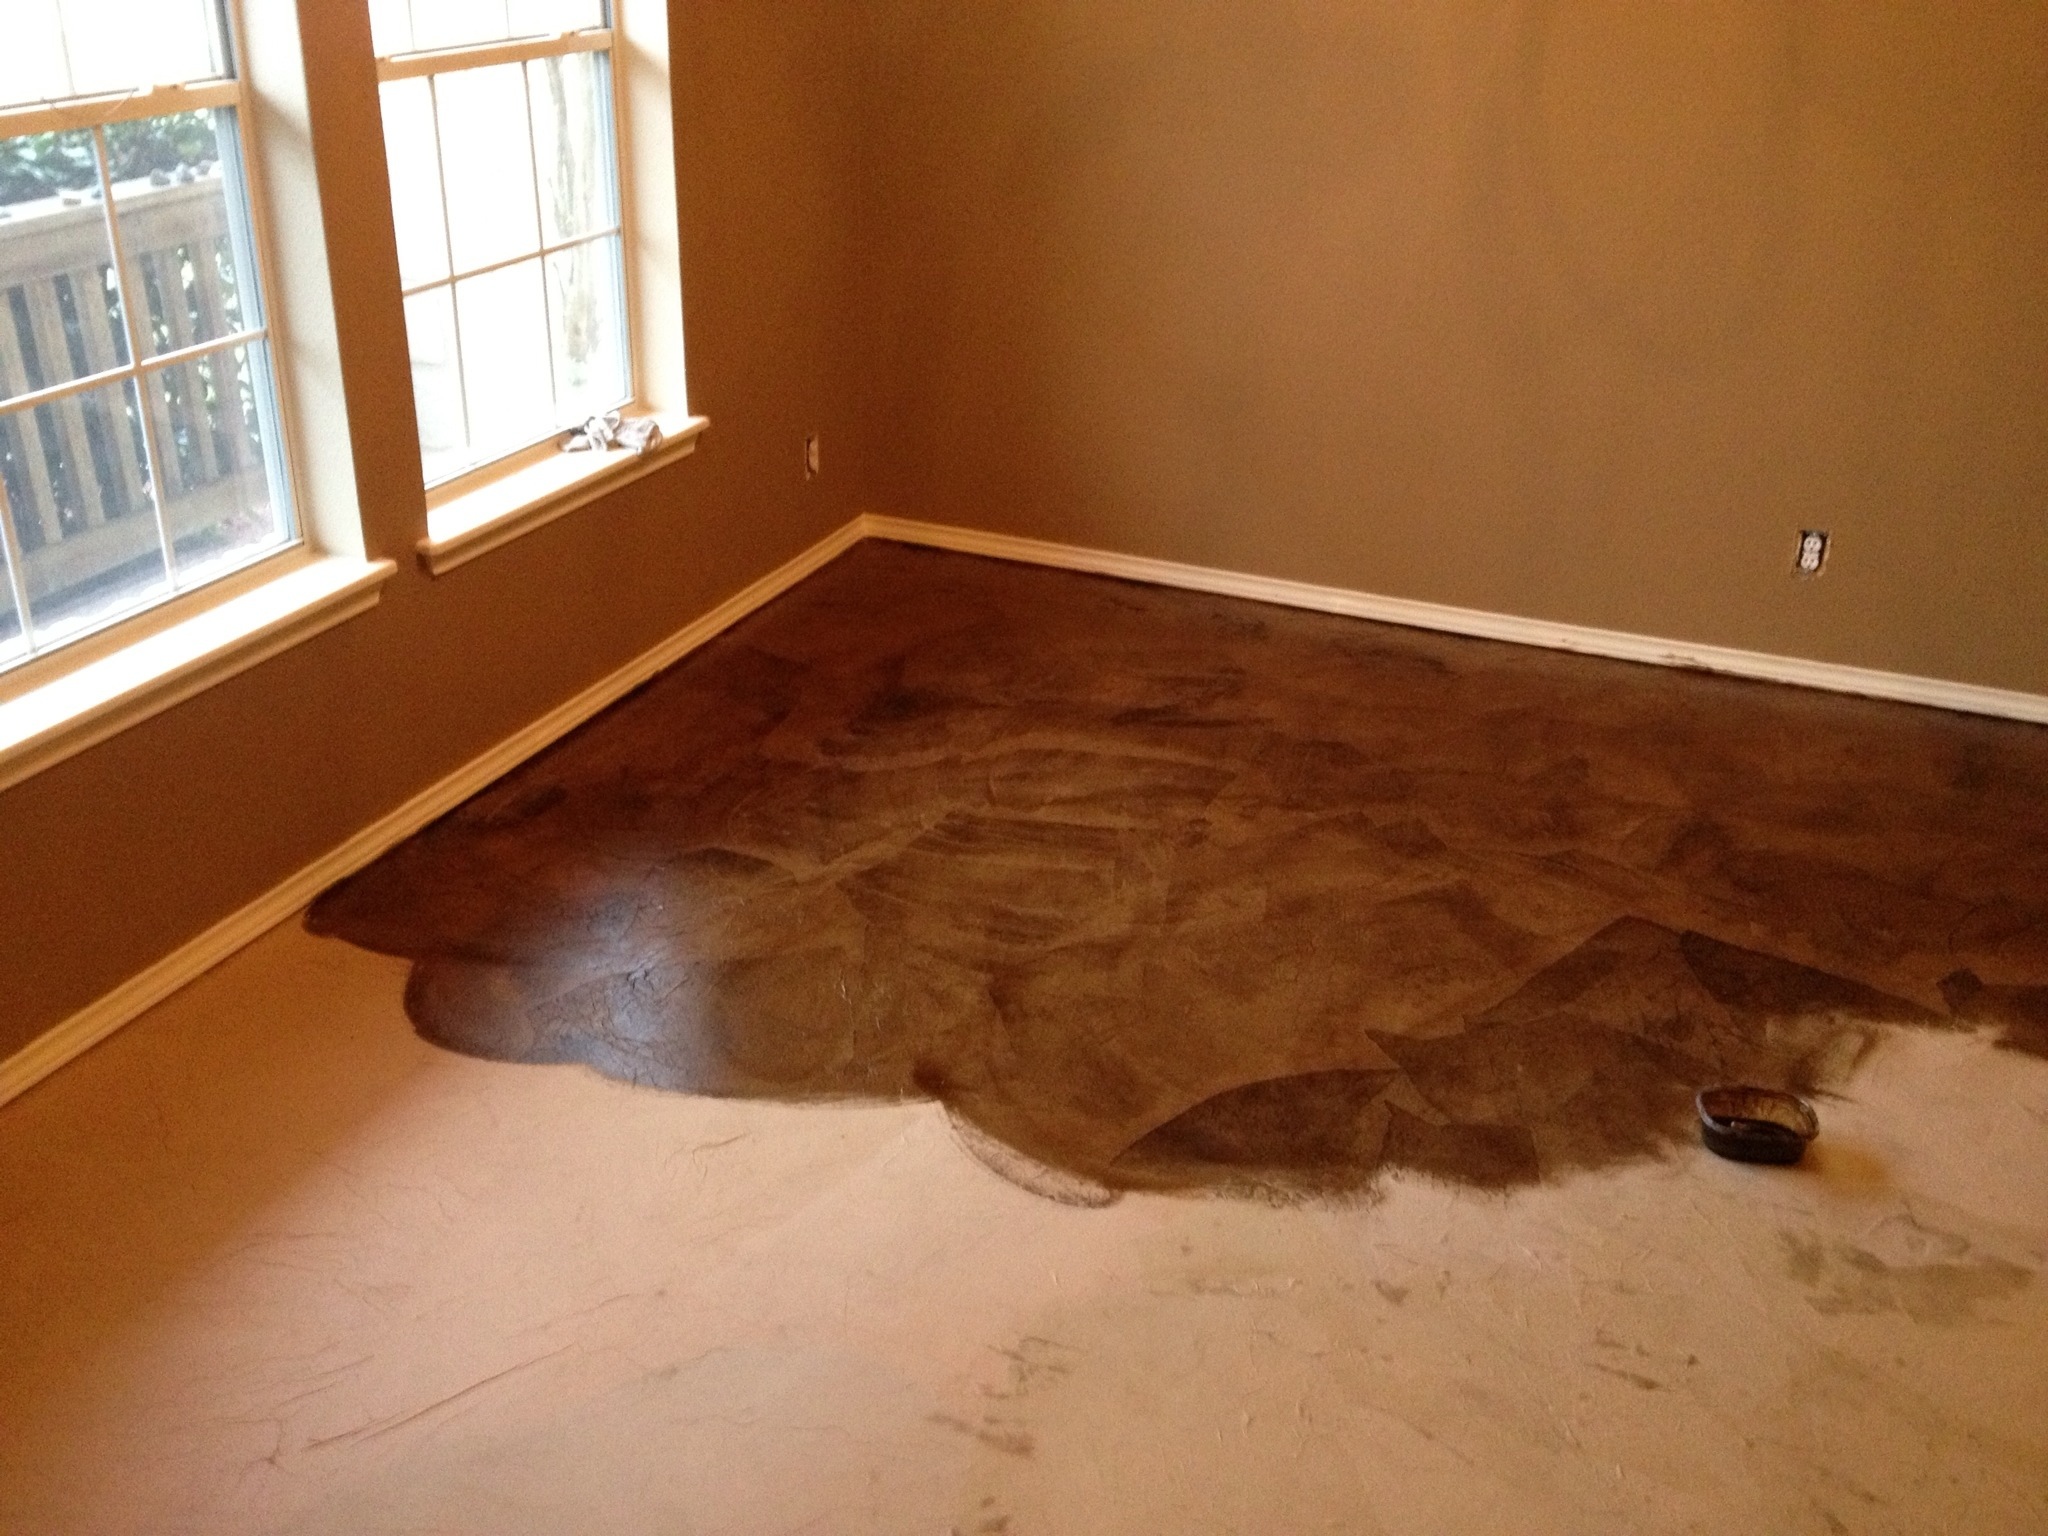 Diy Paper Bag Floors That Look Like Stained Concrete Momdepot